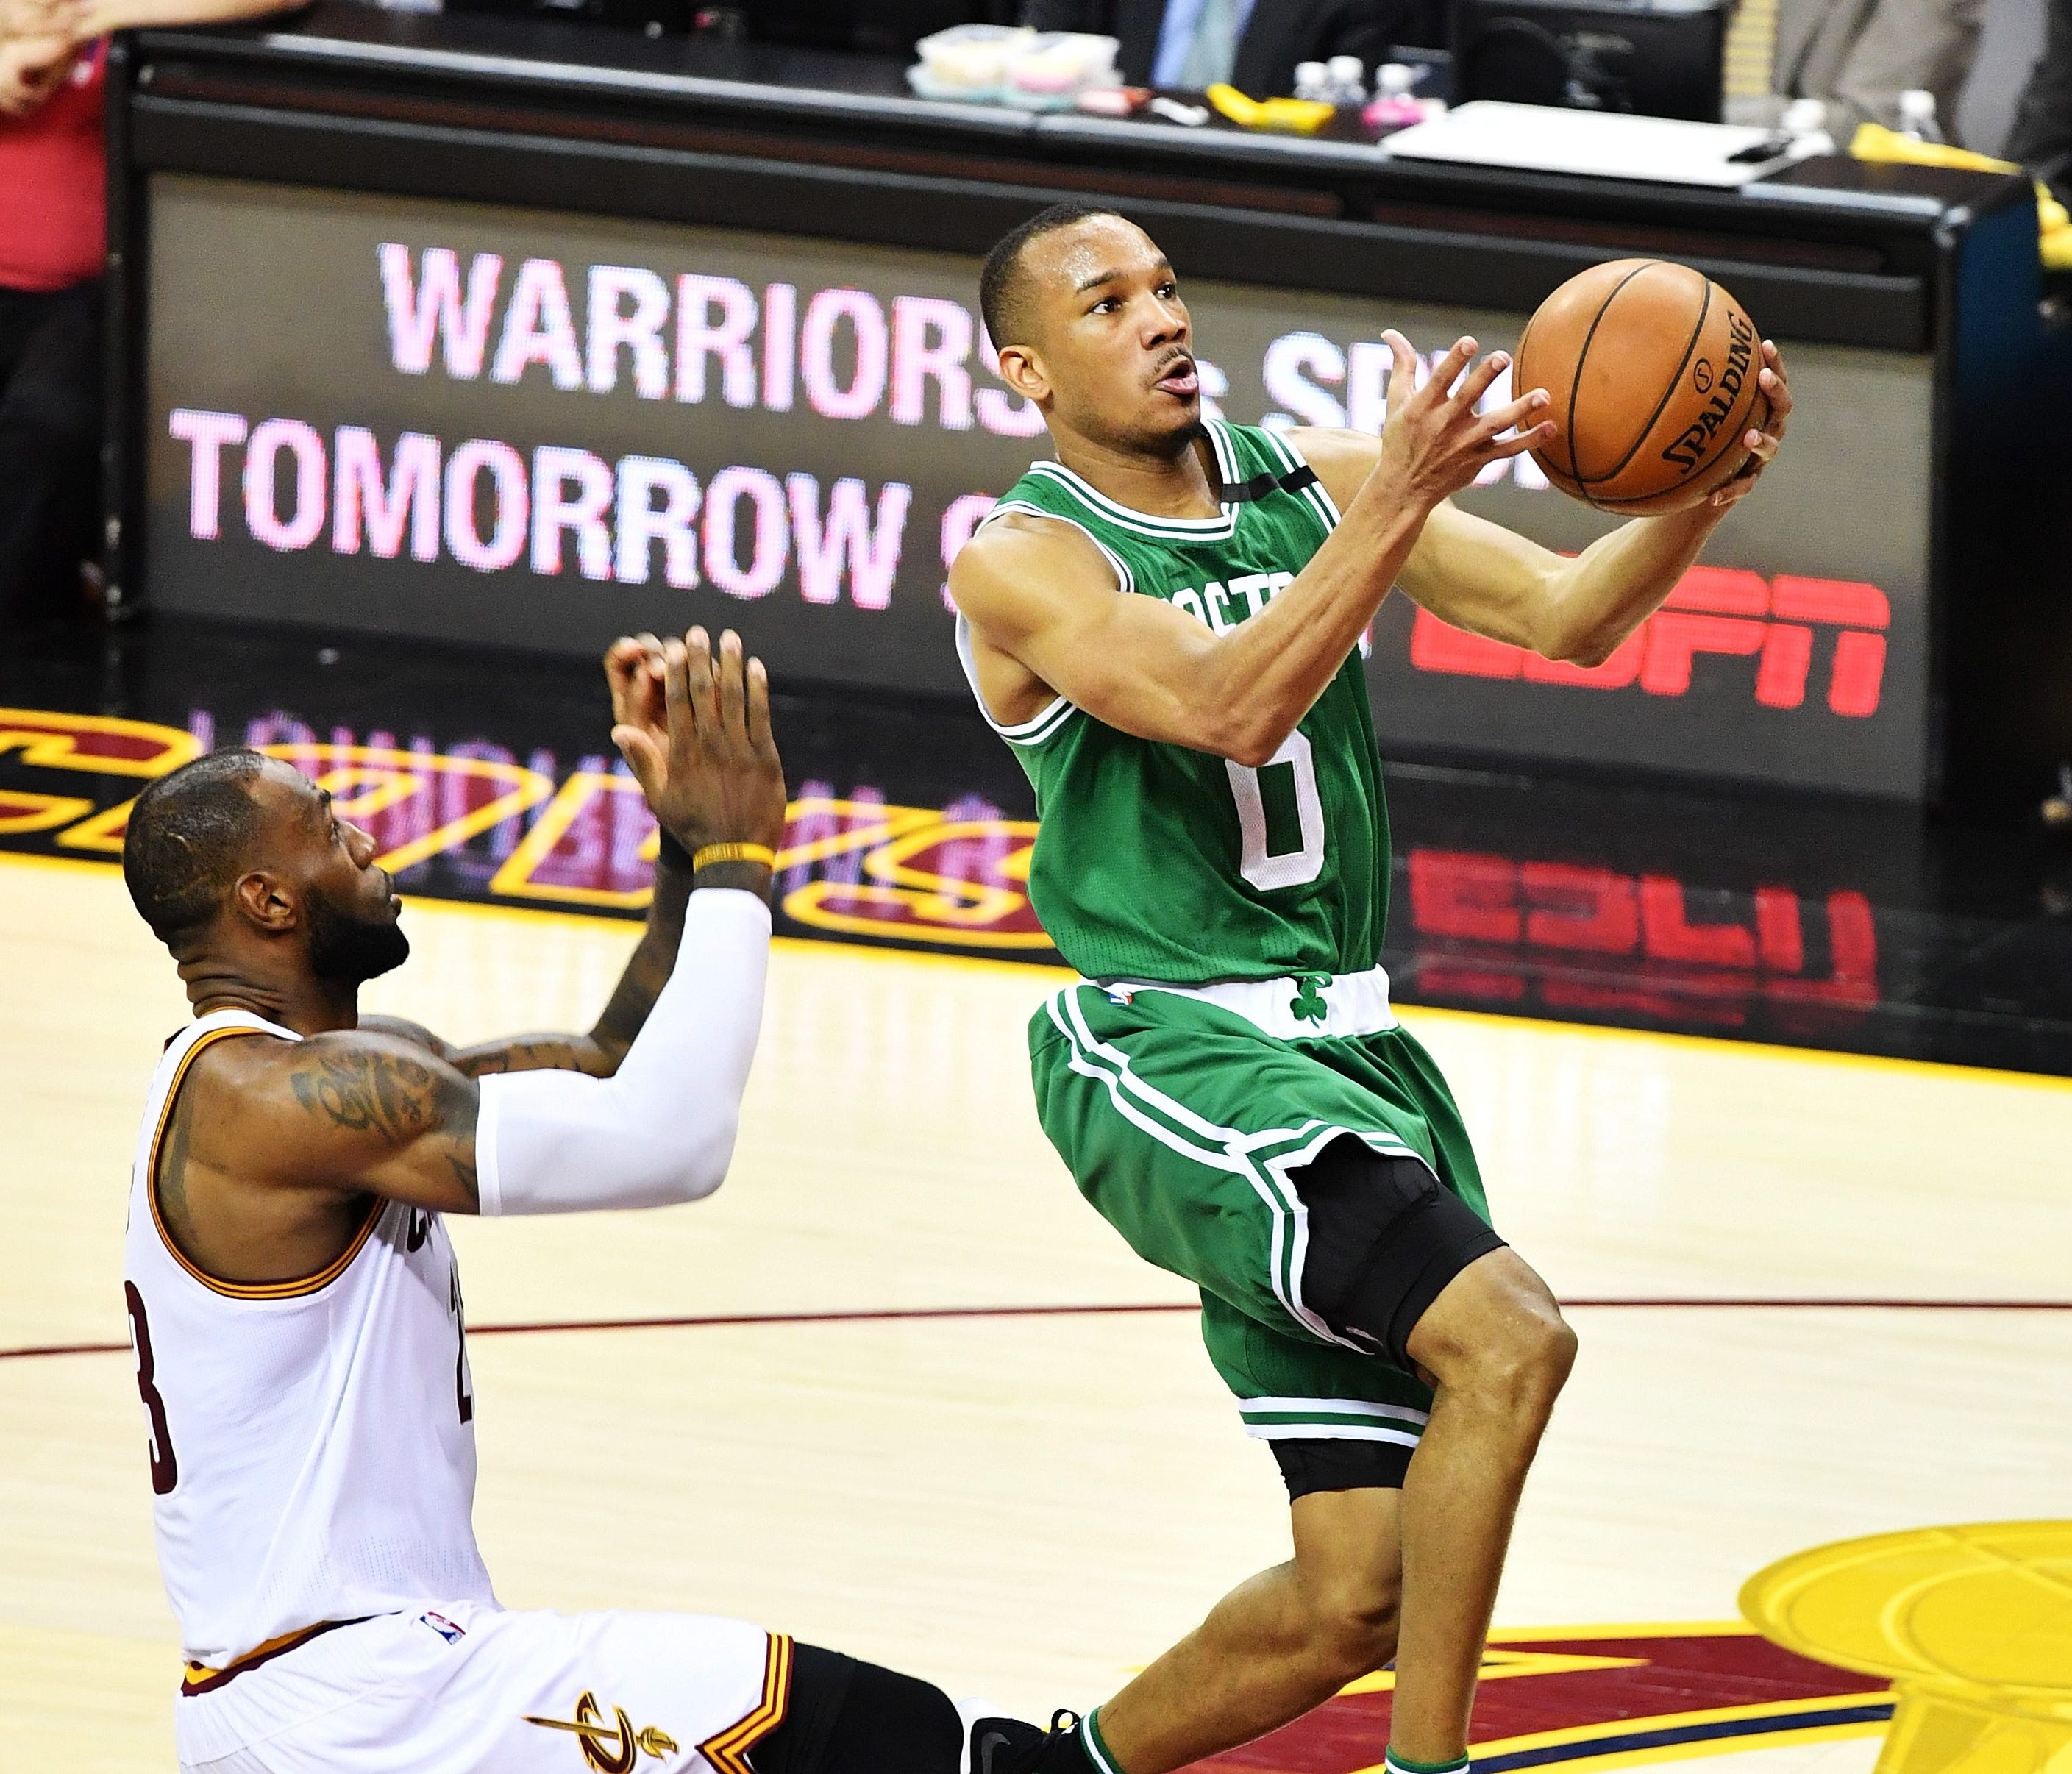 Avery Bradley #0 of the Boston Celtics goes up against LeBron James #23 of the Cleveland Cavaliers in the second half during Game Three of the 2017 NBA Eastern Conference Finals at Quicken Loans Arena on May 21, 2017 in Cleveland, Ohio